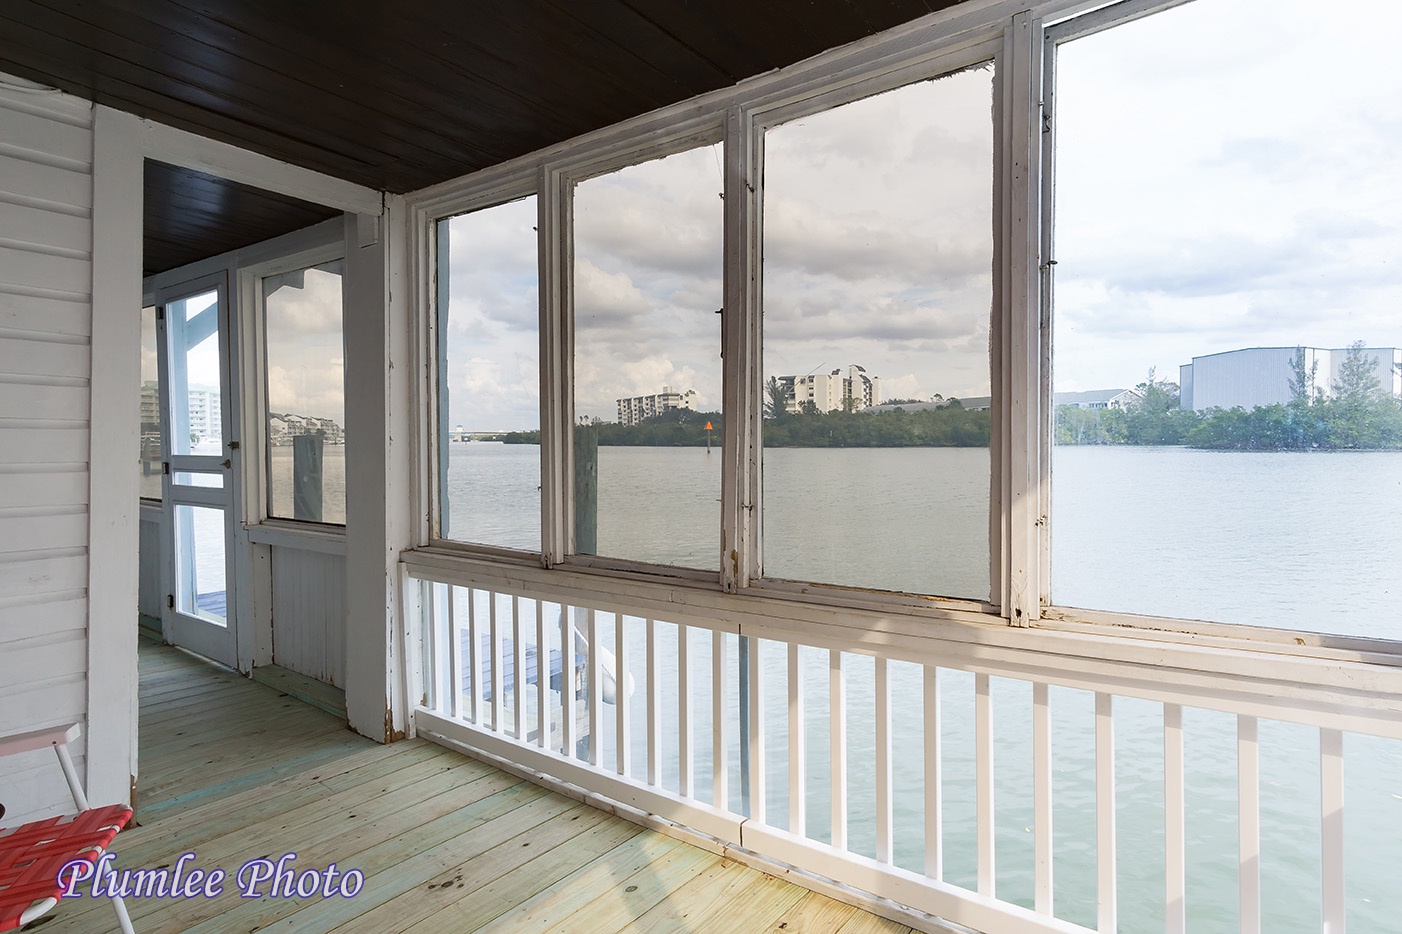 The 1st Floor screened in Porch runs the length of the house along the water.